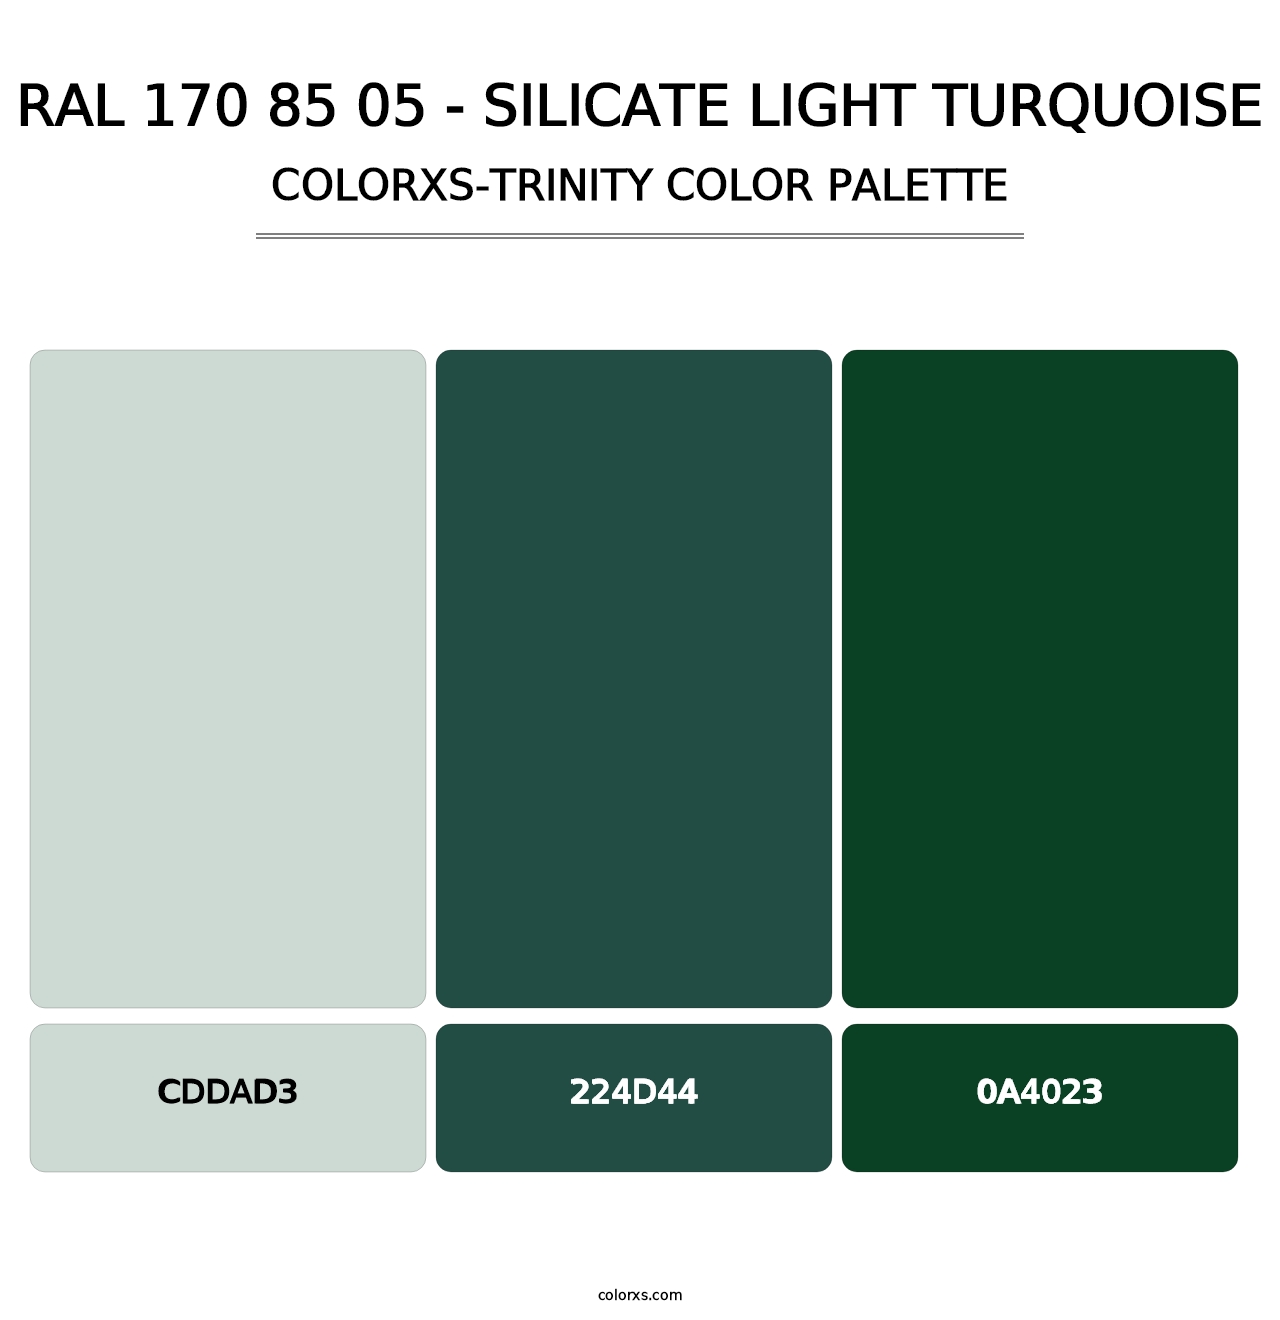 RAL 170 85 05 - Silicate Light Turquoise - Colorxs Trinity Palette